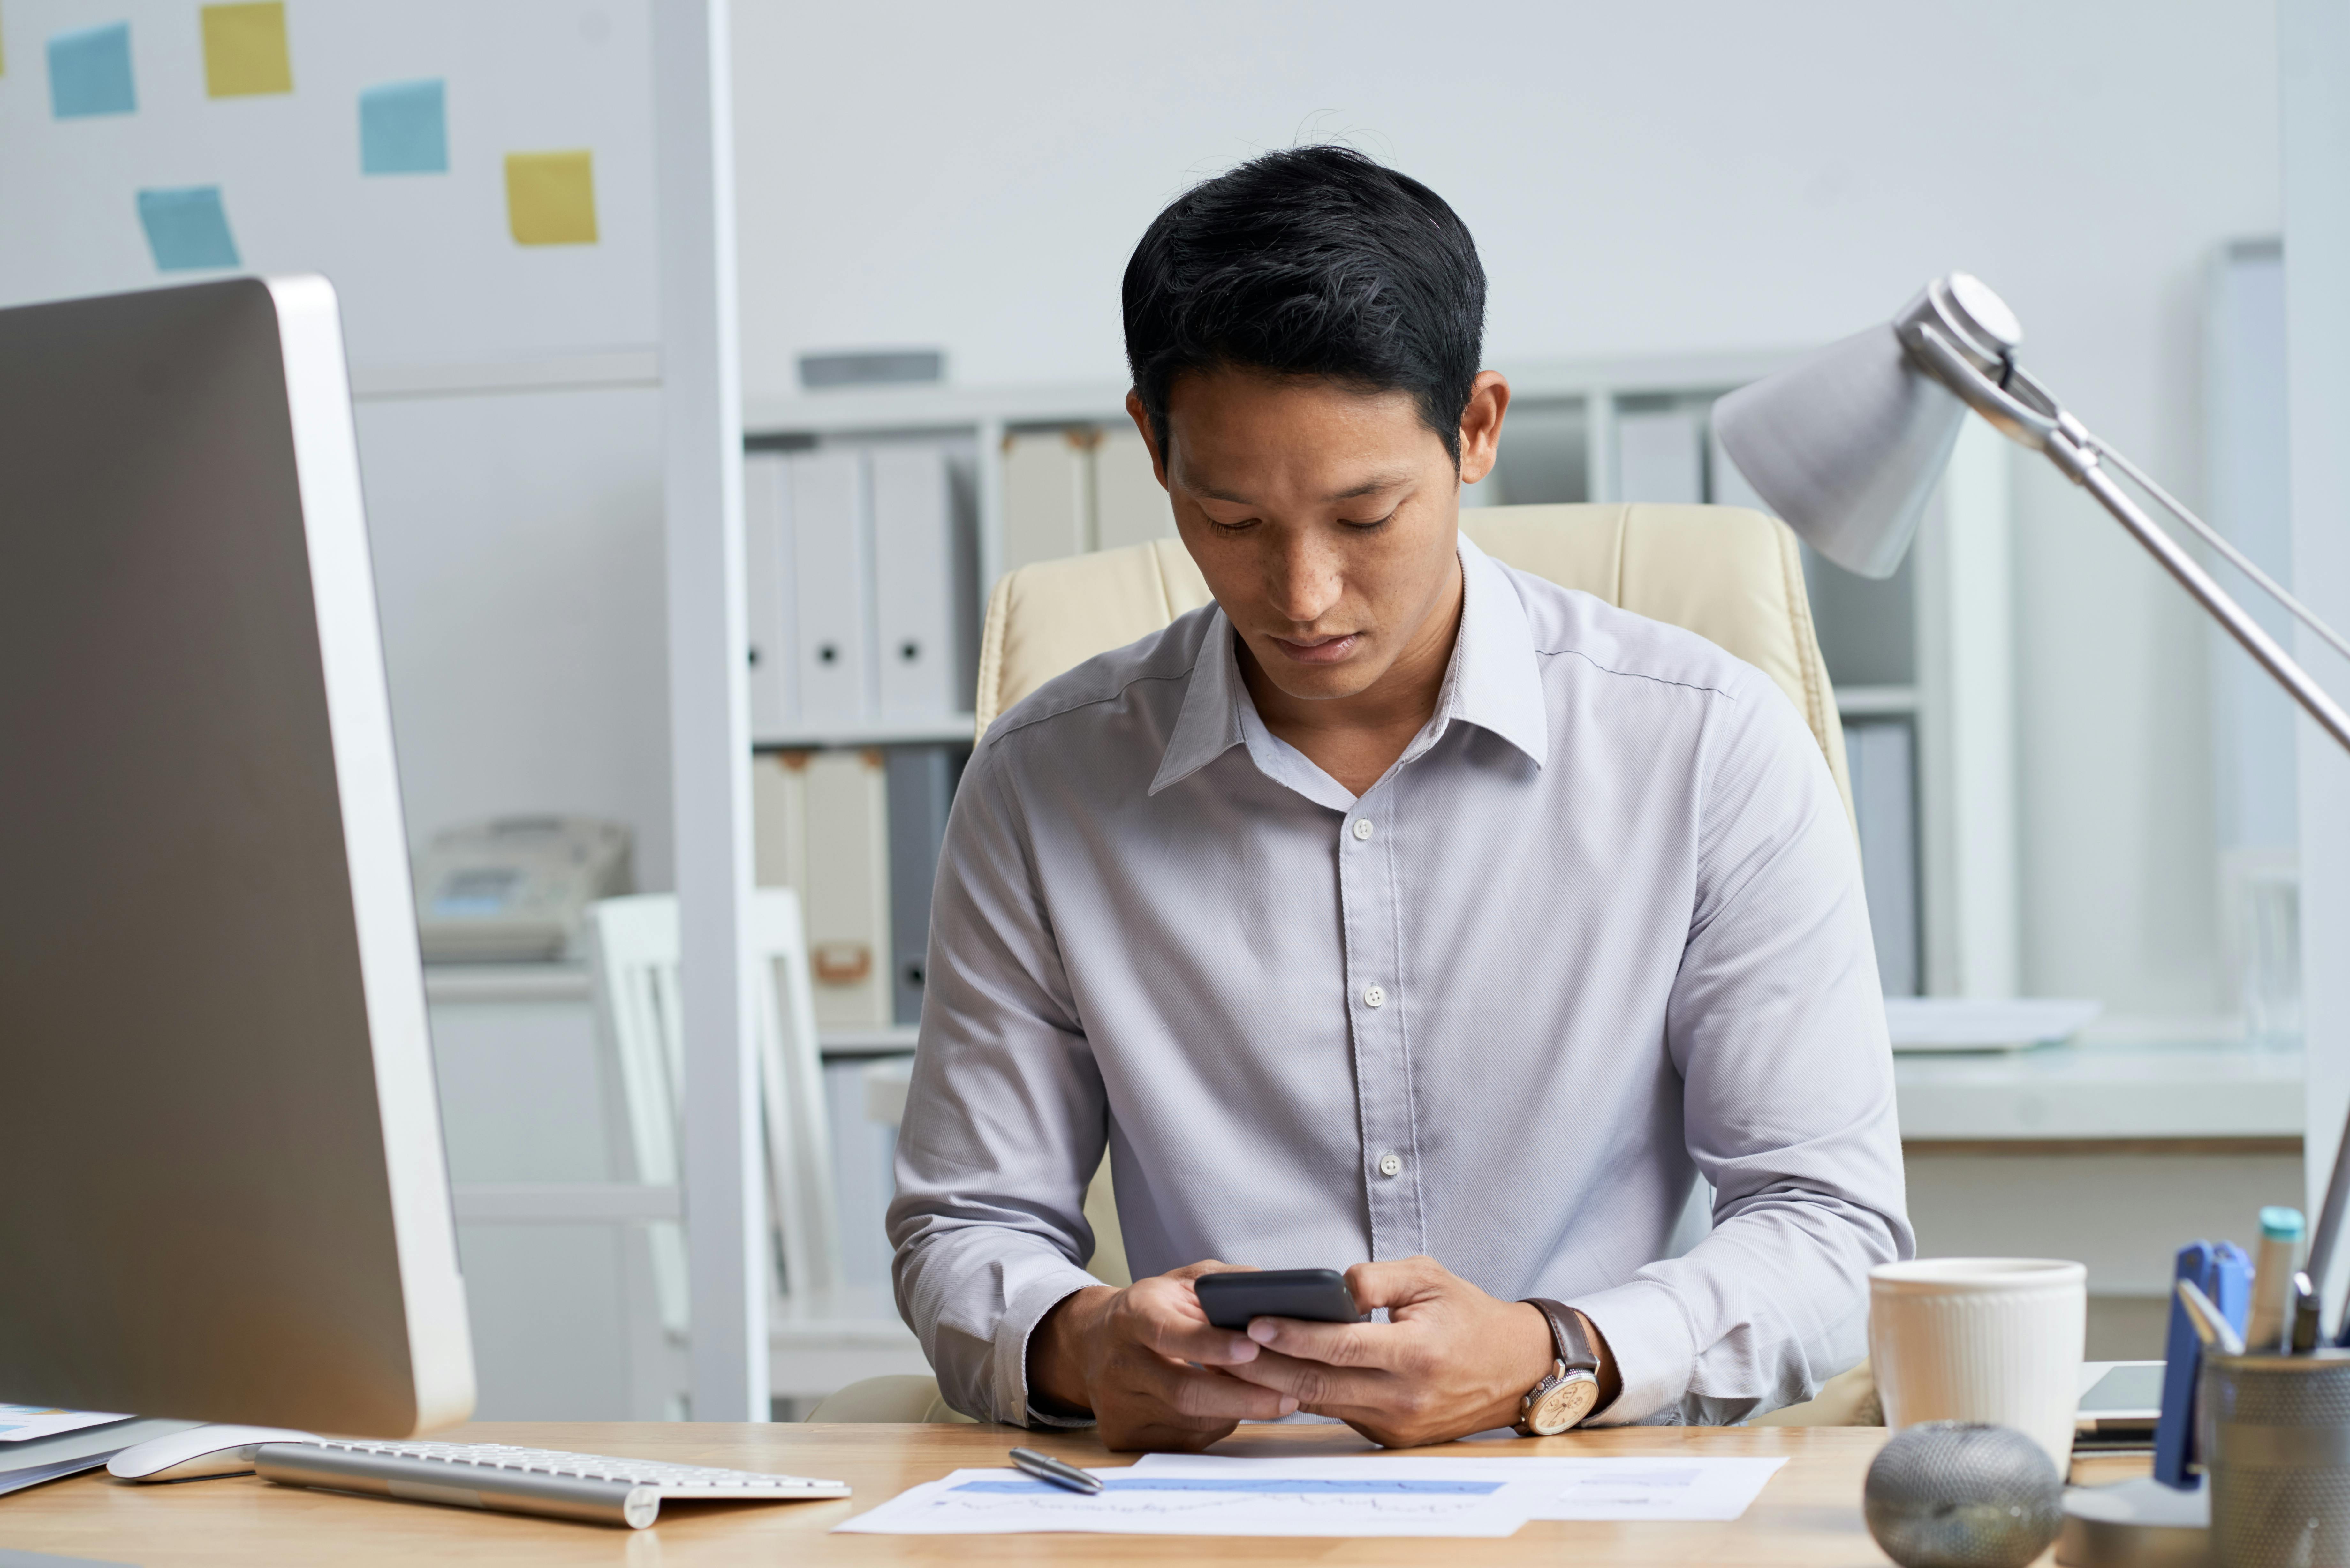 Asian man on cellphone can’t focus on one task while at desk in office